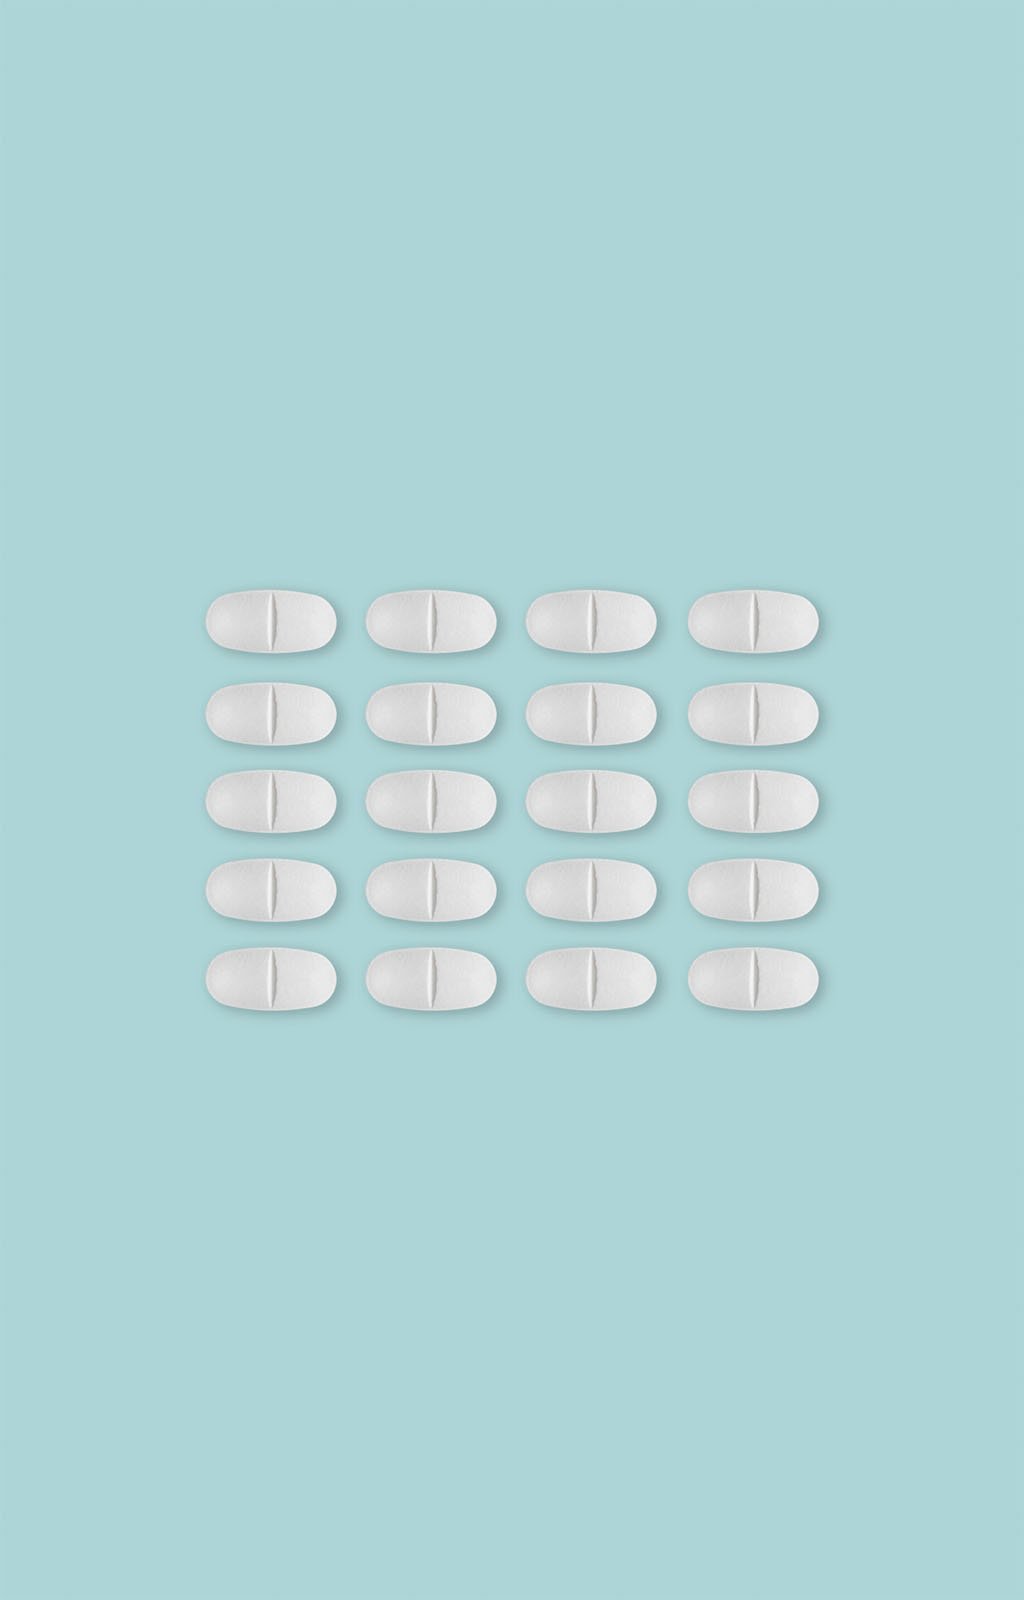 Four columns of white oval tablets, with each column containing five tablets, arranged on a uniform light blue background.